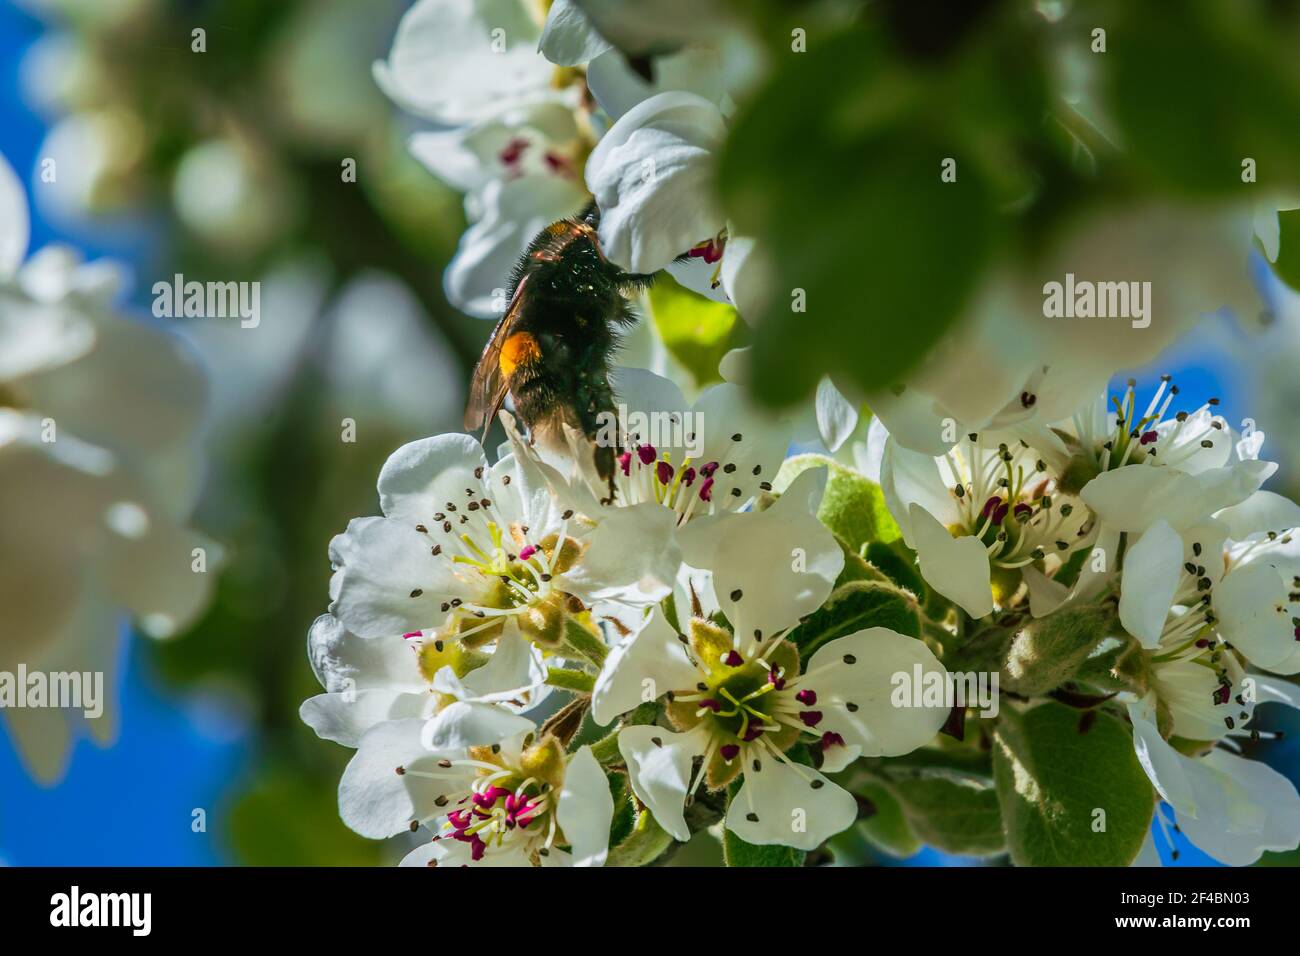 Insect bee or bumblebee crawls over a white flower in spring. Branch of a fruit tree in the sunshine. Apple tree with many white opened flowers, flowe Stock Photo